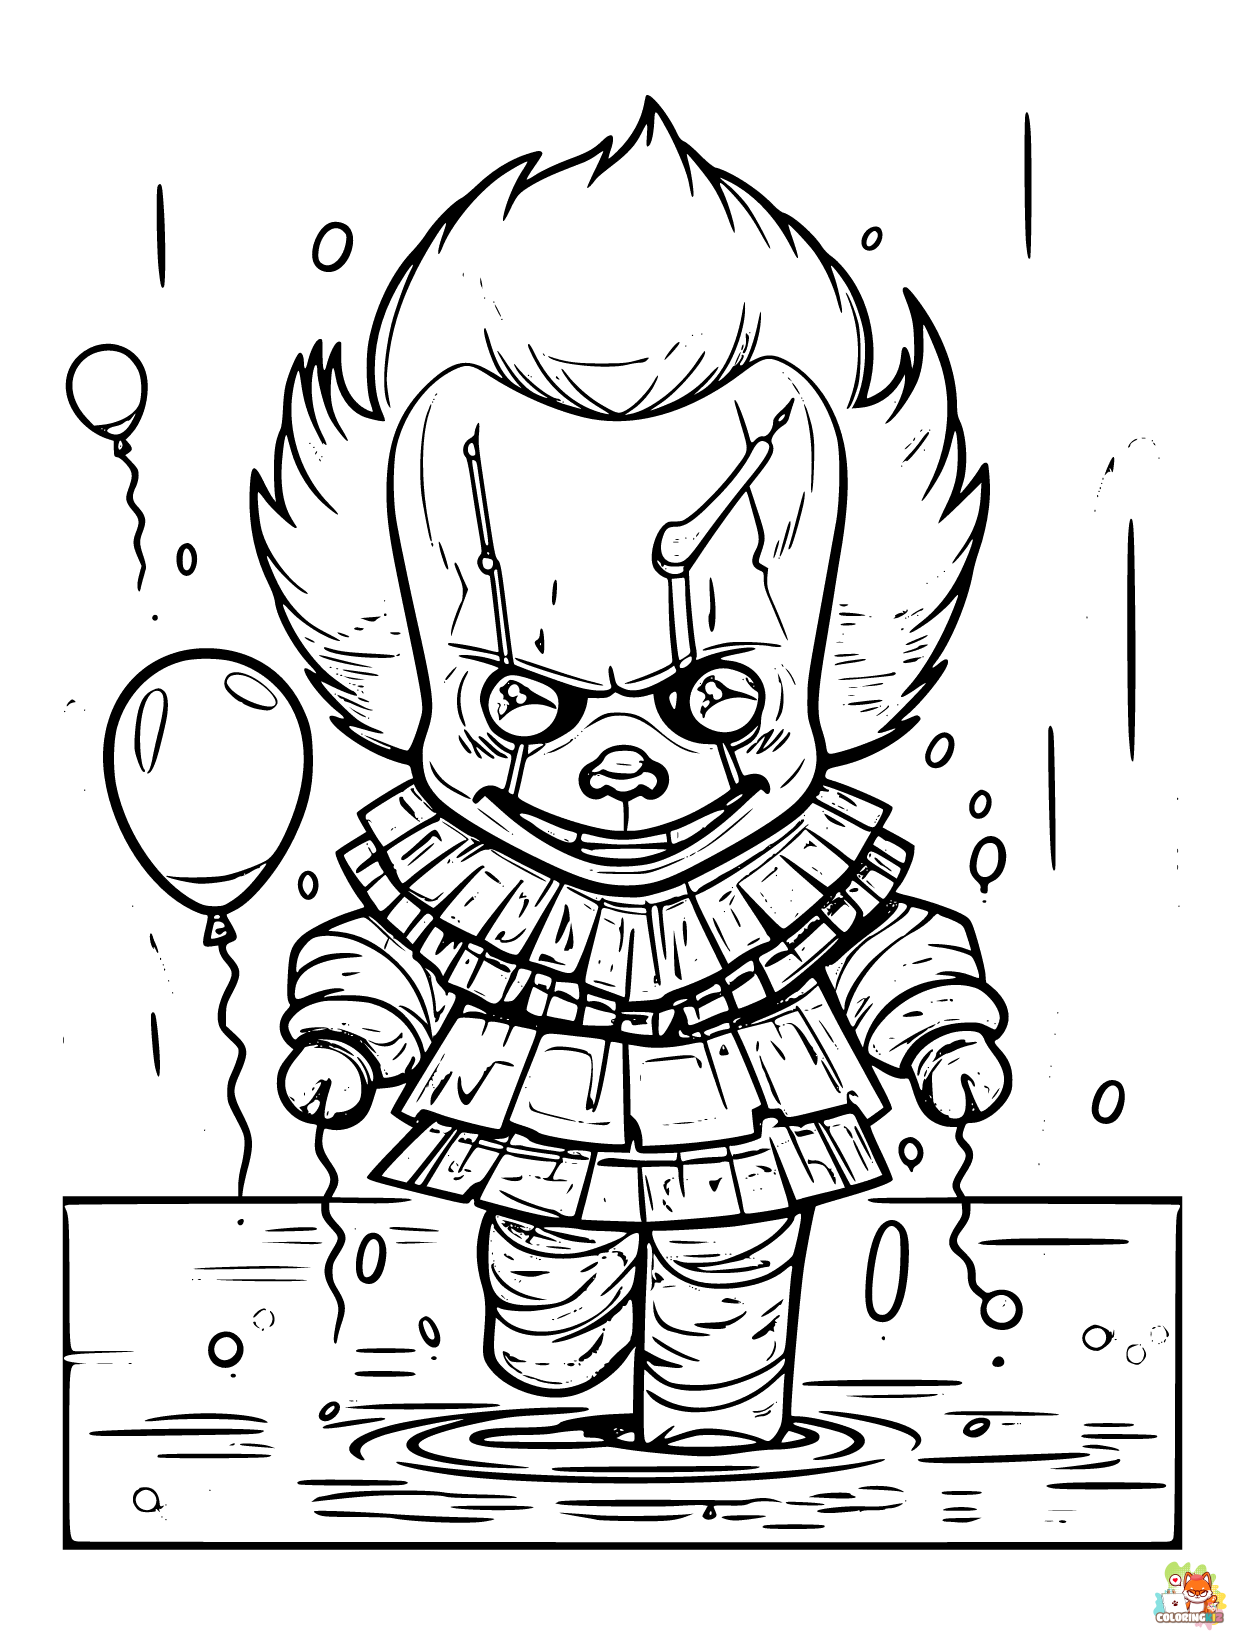 Pennywise coloring pages